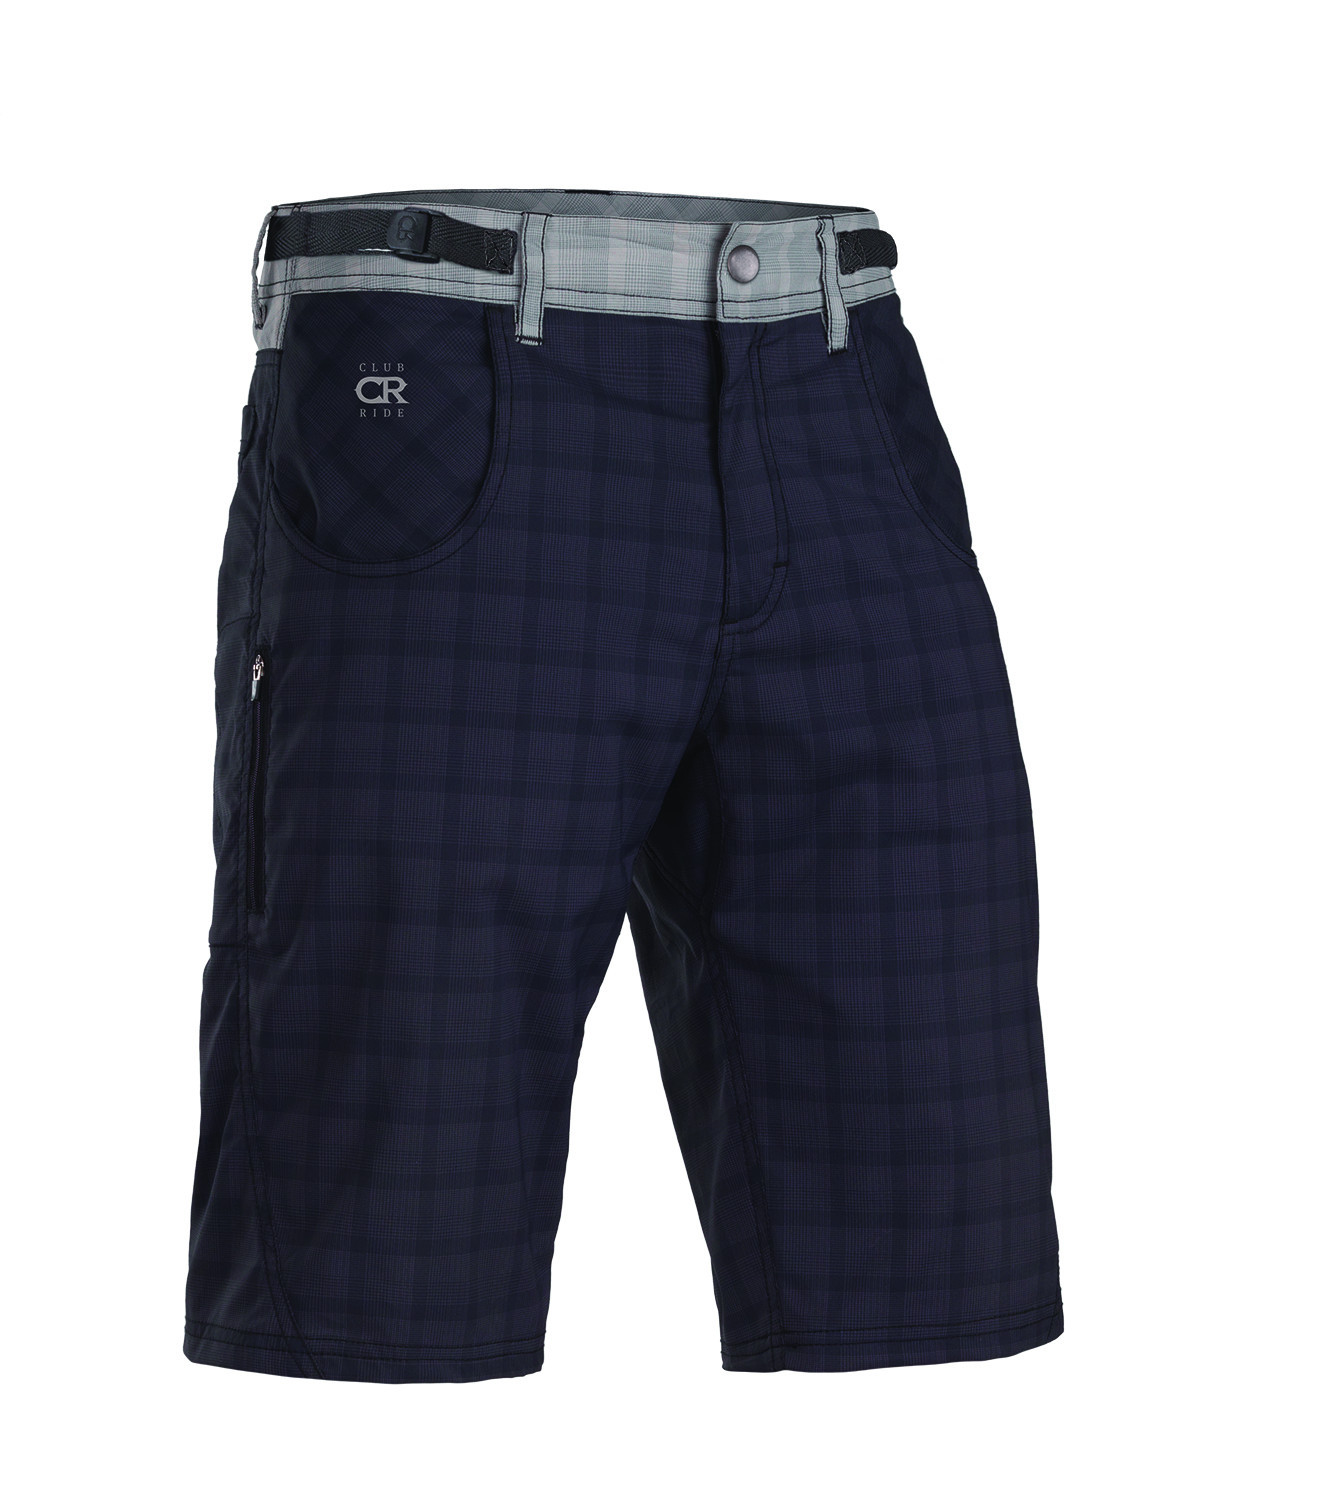 Club Ride Mountain Surf Short Review